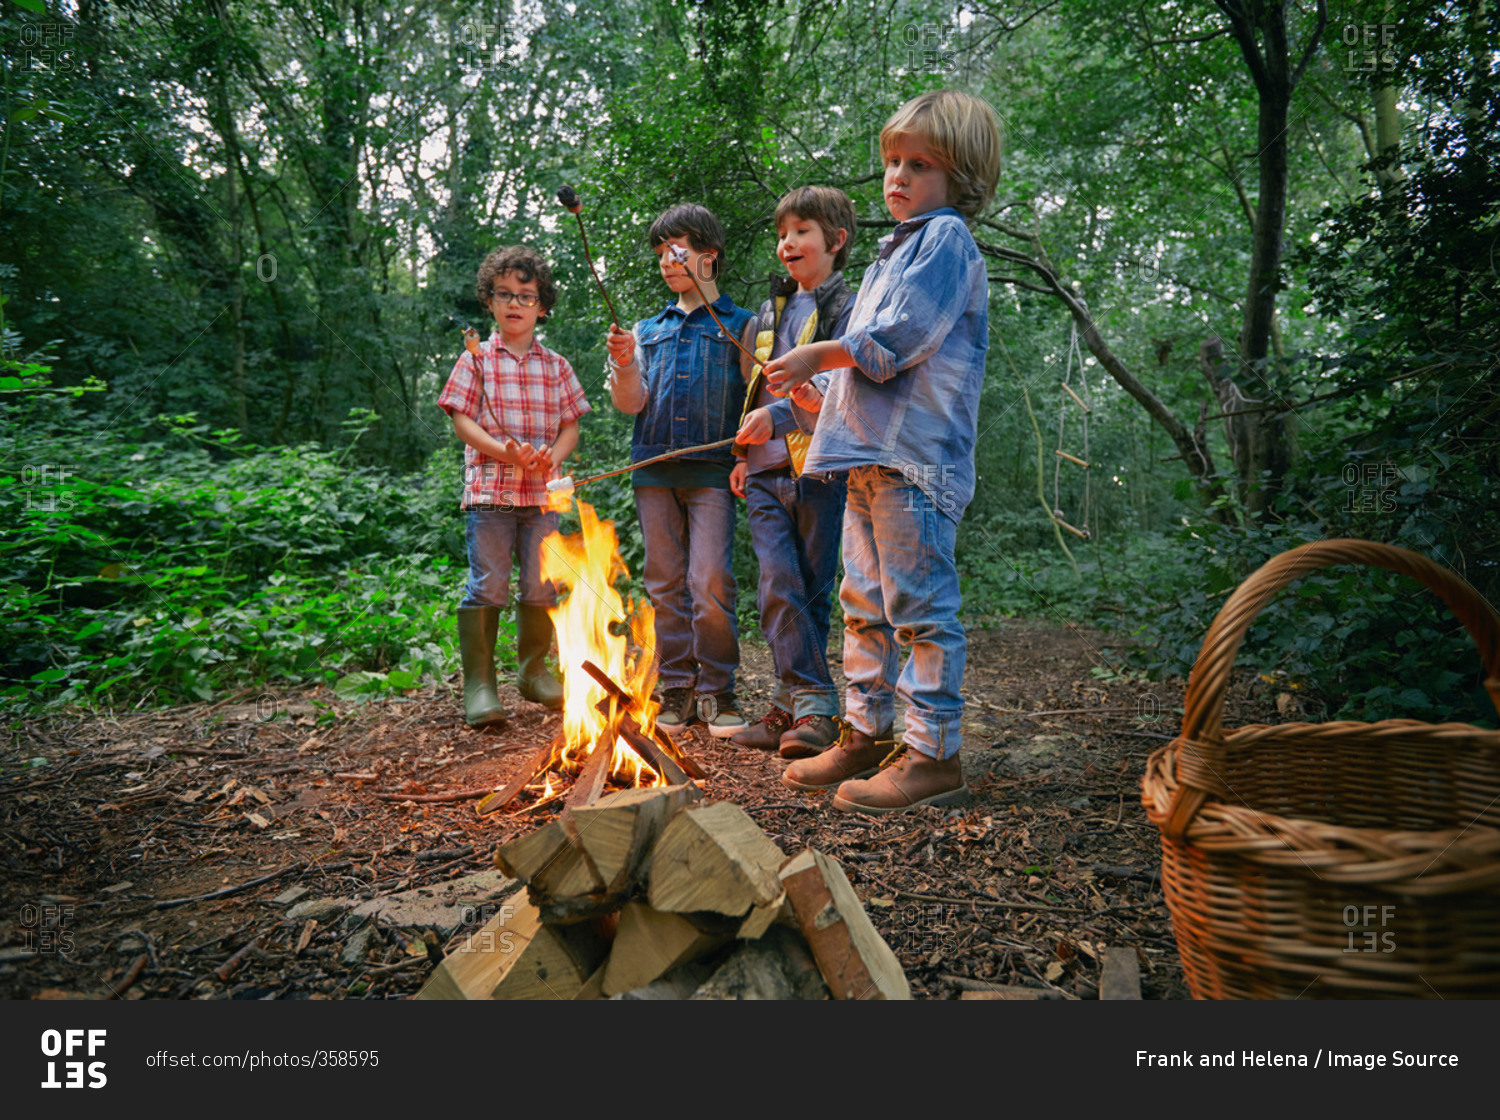 Four boys toasting marshmallows on campfire in forest